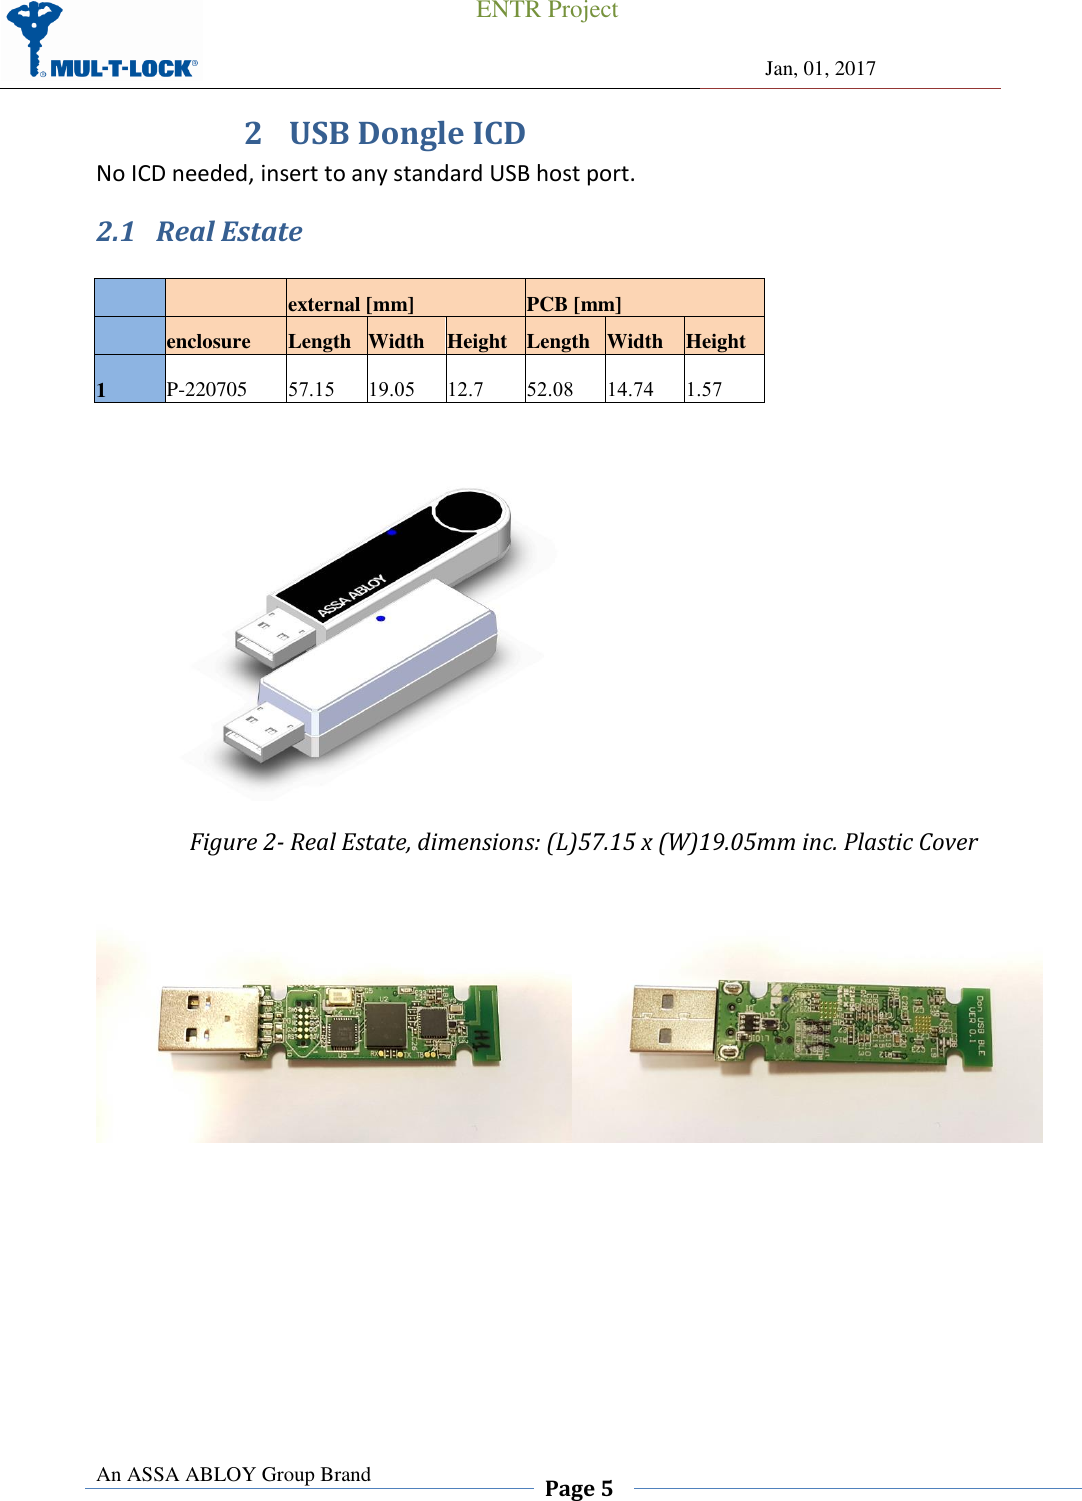                                                 ENTR Project                Jan, 01, 2017  An ASSA ABLOY Group Brand  Page 5    2 USB Dongle ICD No ICD needed, insert to any standard USB host port. 2.1 Real Estate      external [mm] PCB [mm]   enclosure Length Width Height Length Width Height 1 P-220705 57.15 19.05 12.7 52.08 14.74 1.57   Figure 2- Real Estate, dimensions: (L)57.15 x (W)19.05mm inc. Plastic Cover              